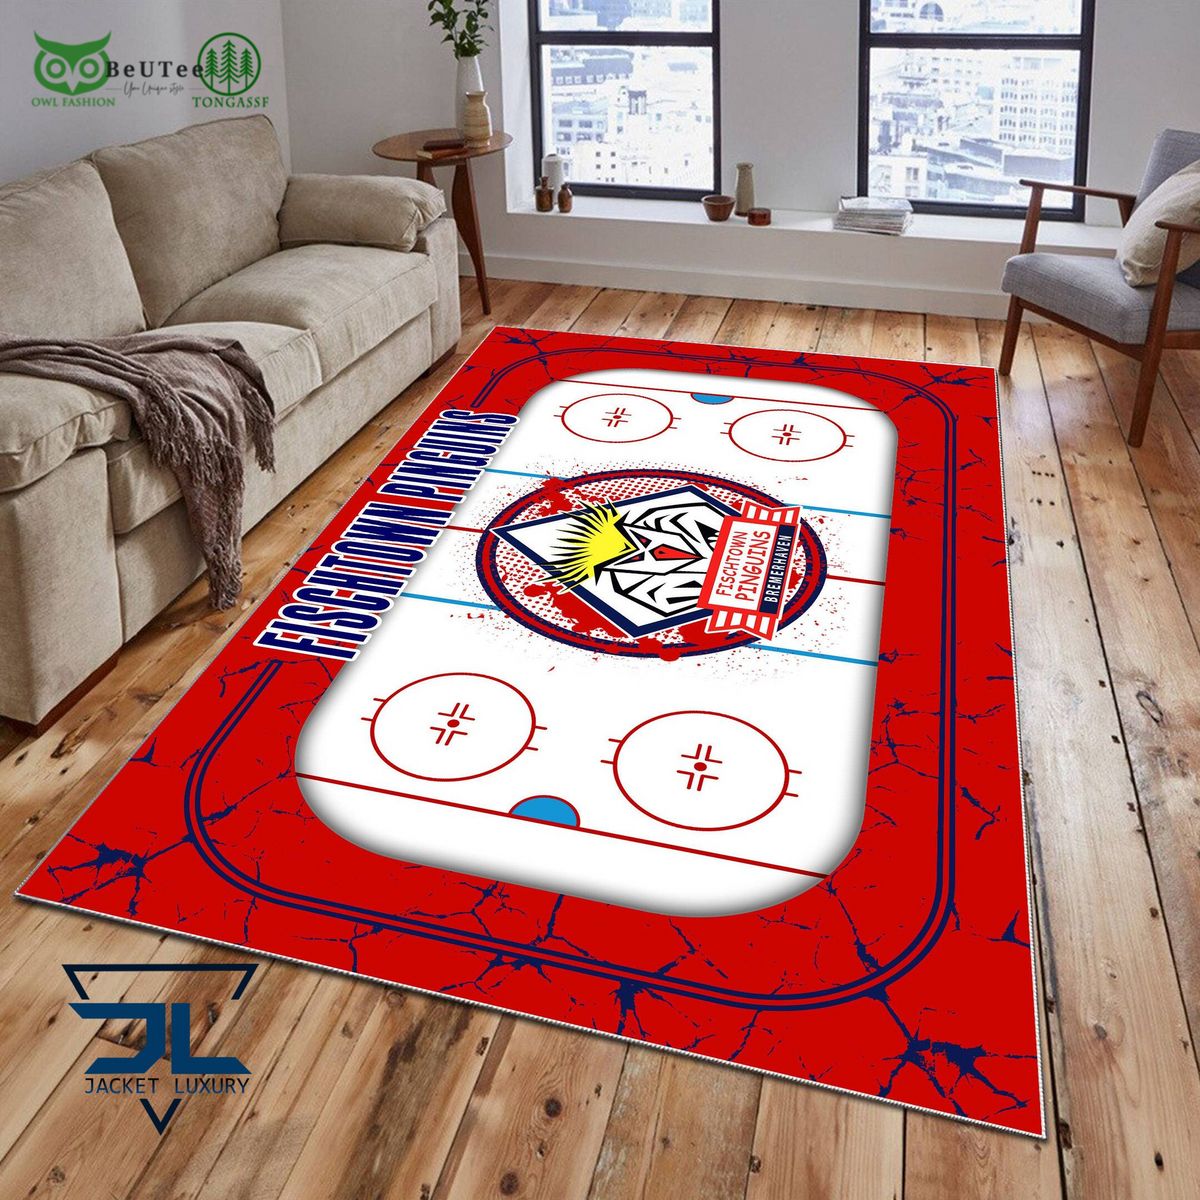 fischtown pinguins germany ice hockey team carpet rug 1 0E0Tp